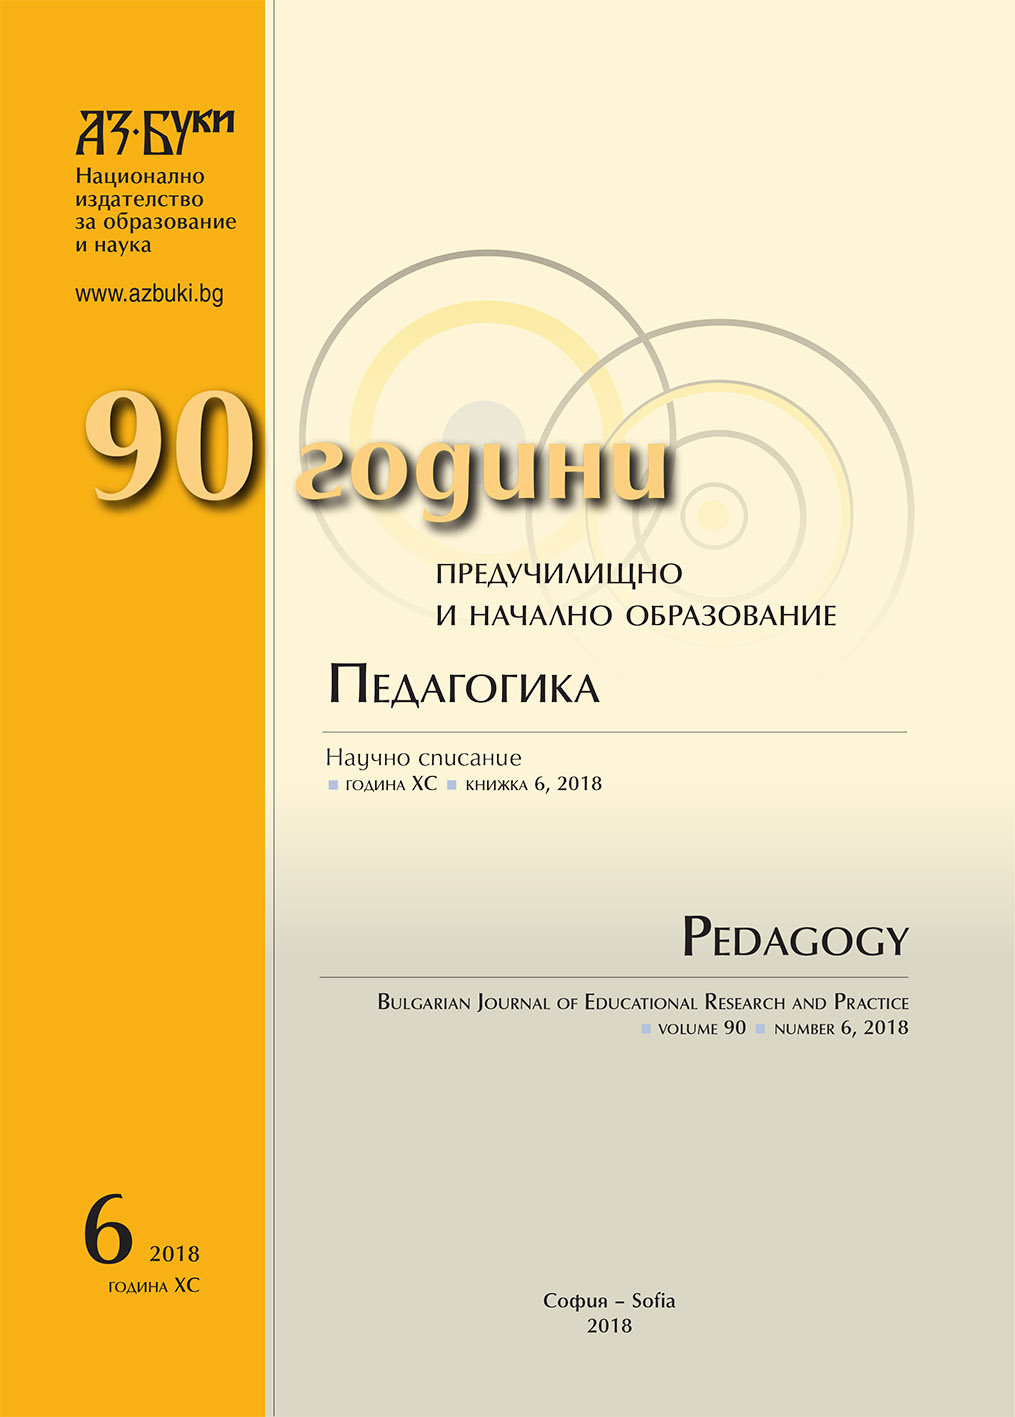 Development of Entrepreneurial Competences in Primary School System in the Republic of Croatia, with a Focus on Competences for Social Entrepreneurship Cover Image